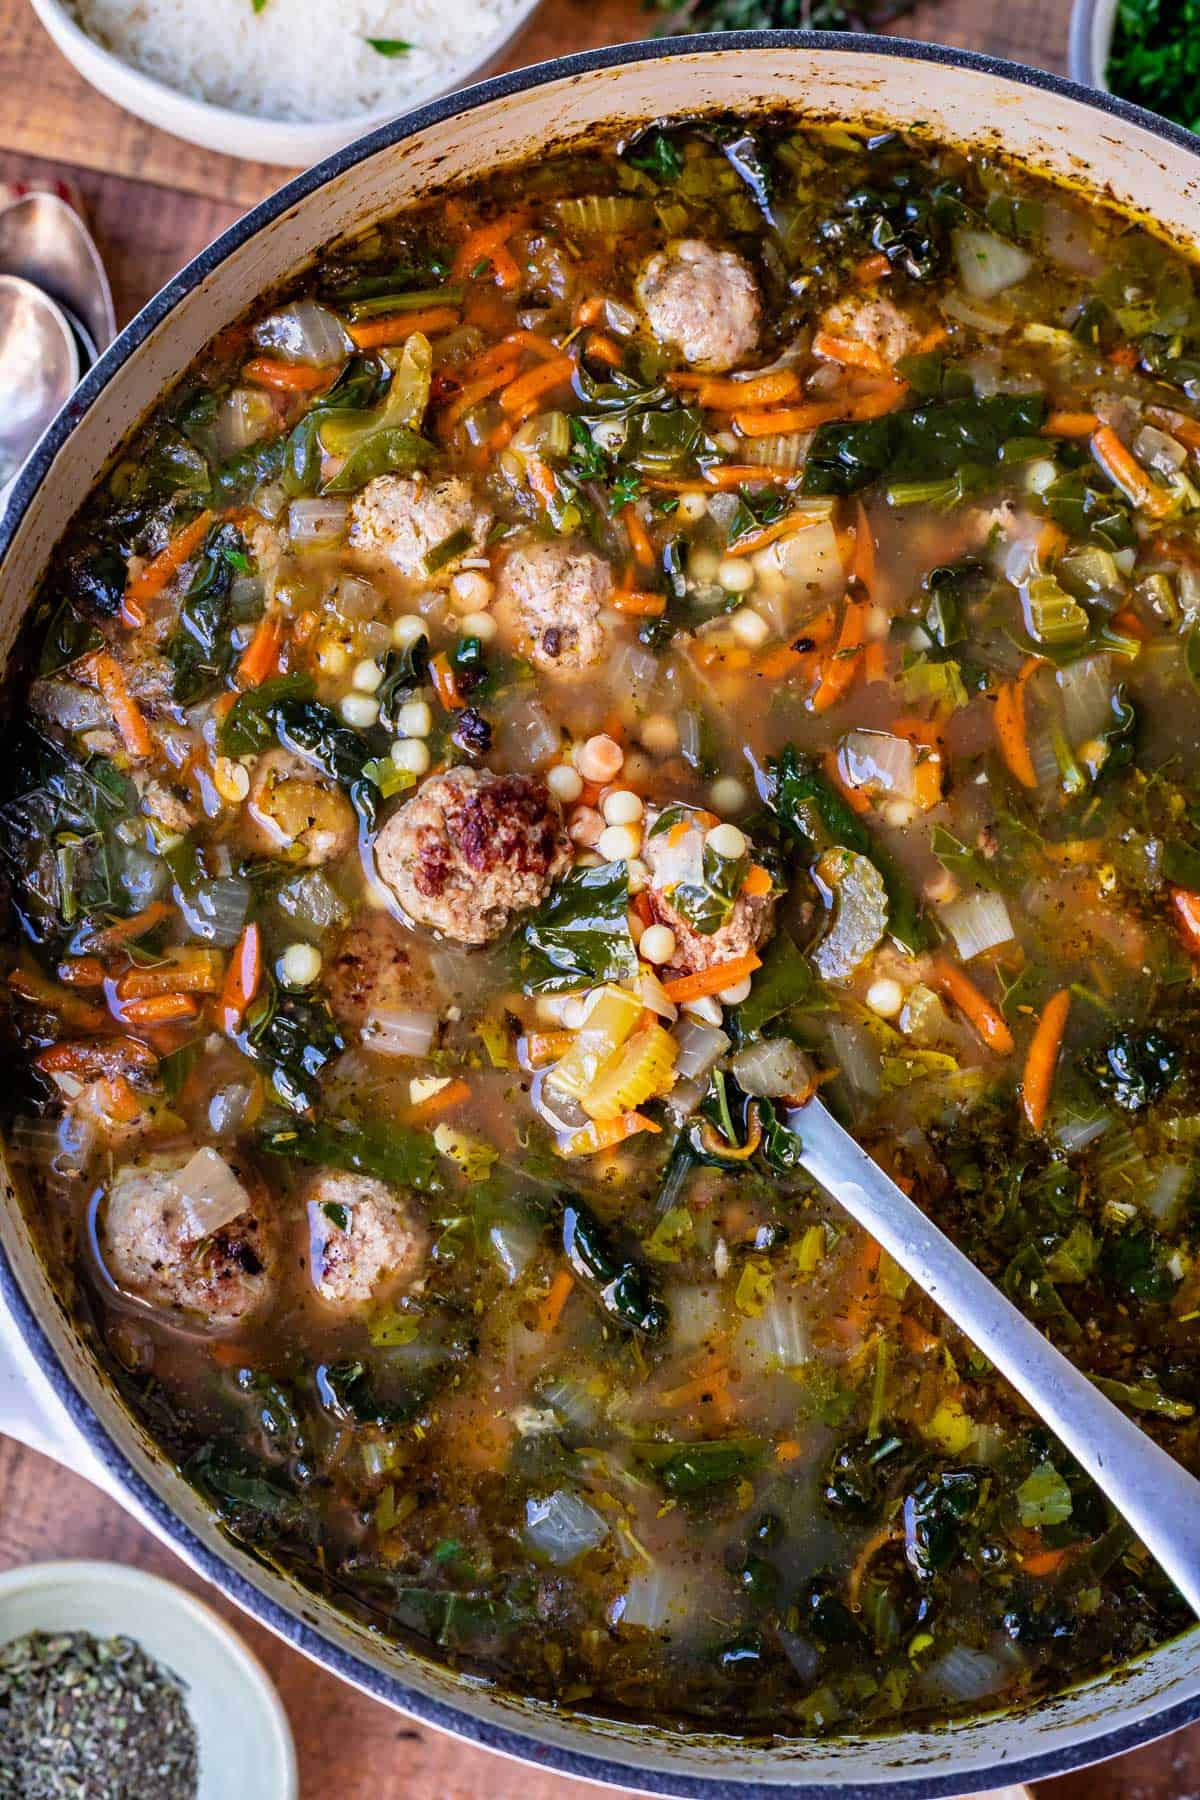 stockpot filled with italian wedding soup recipe made of rich broth, vegetables, and tiny pasta and meatballs.